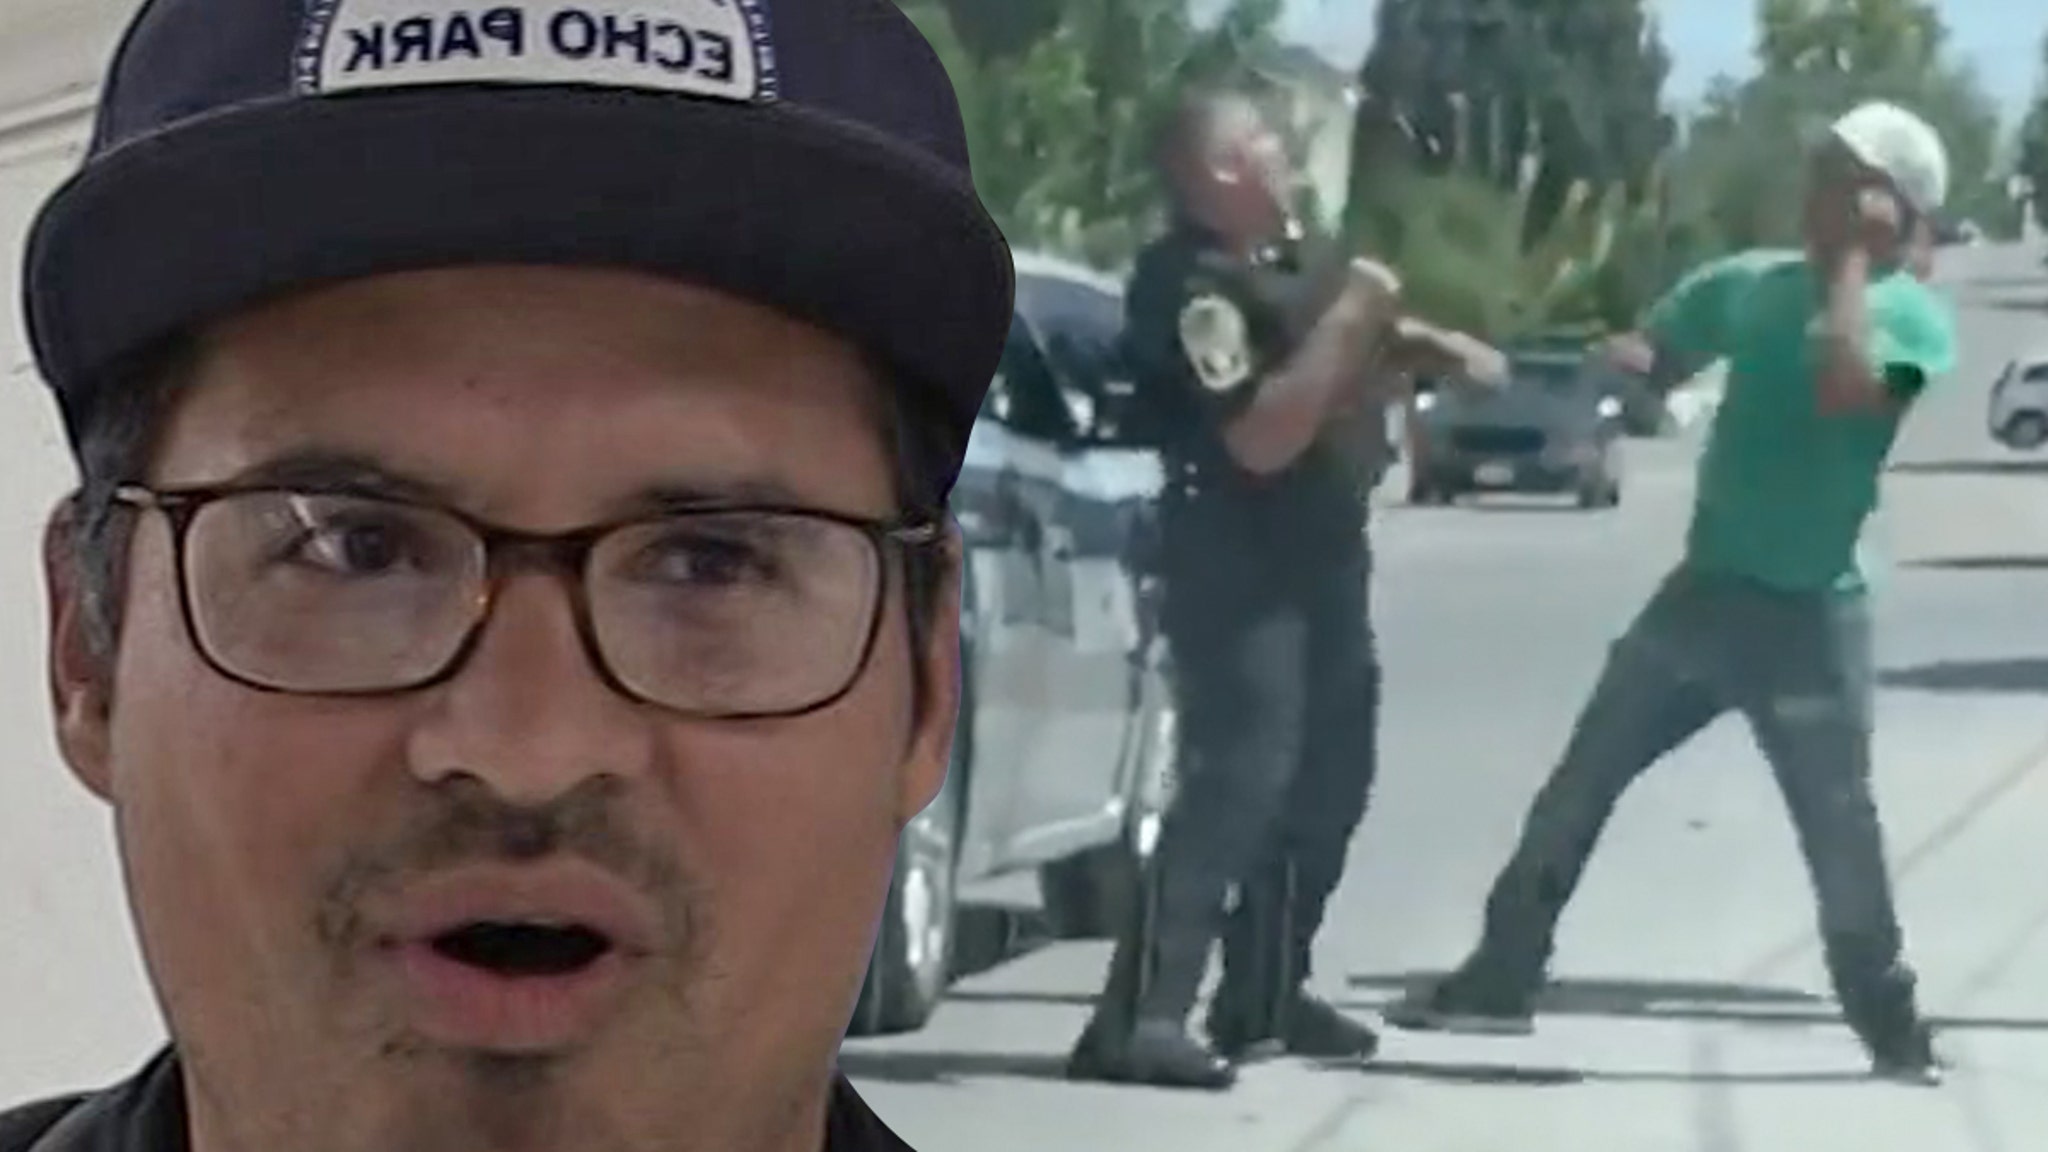 Michael Pena's 'End of Watch' fight compared to viral Cop Brawl clip